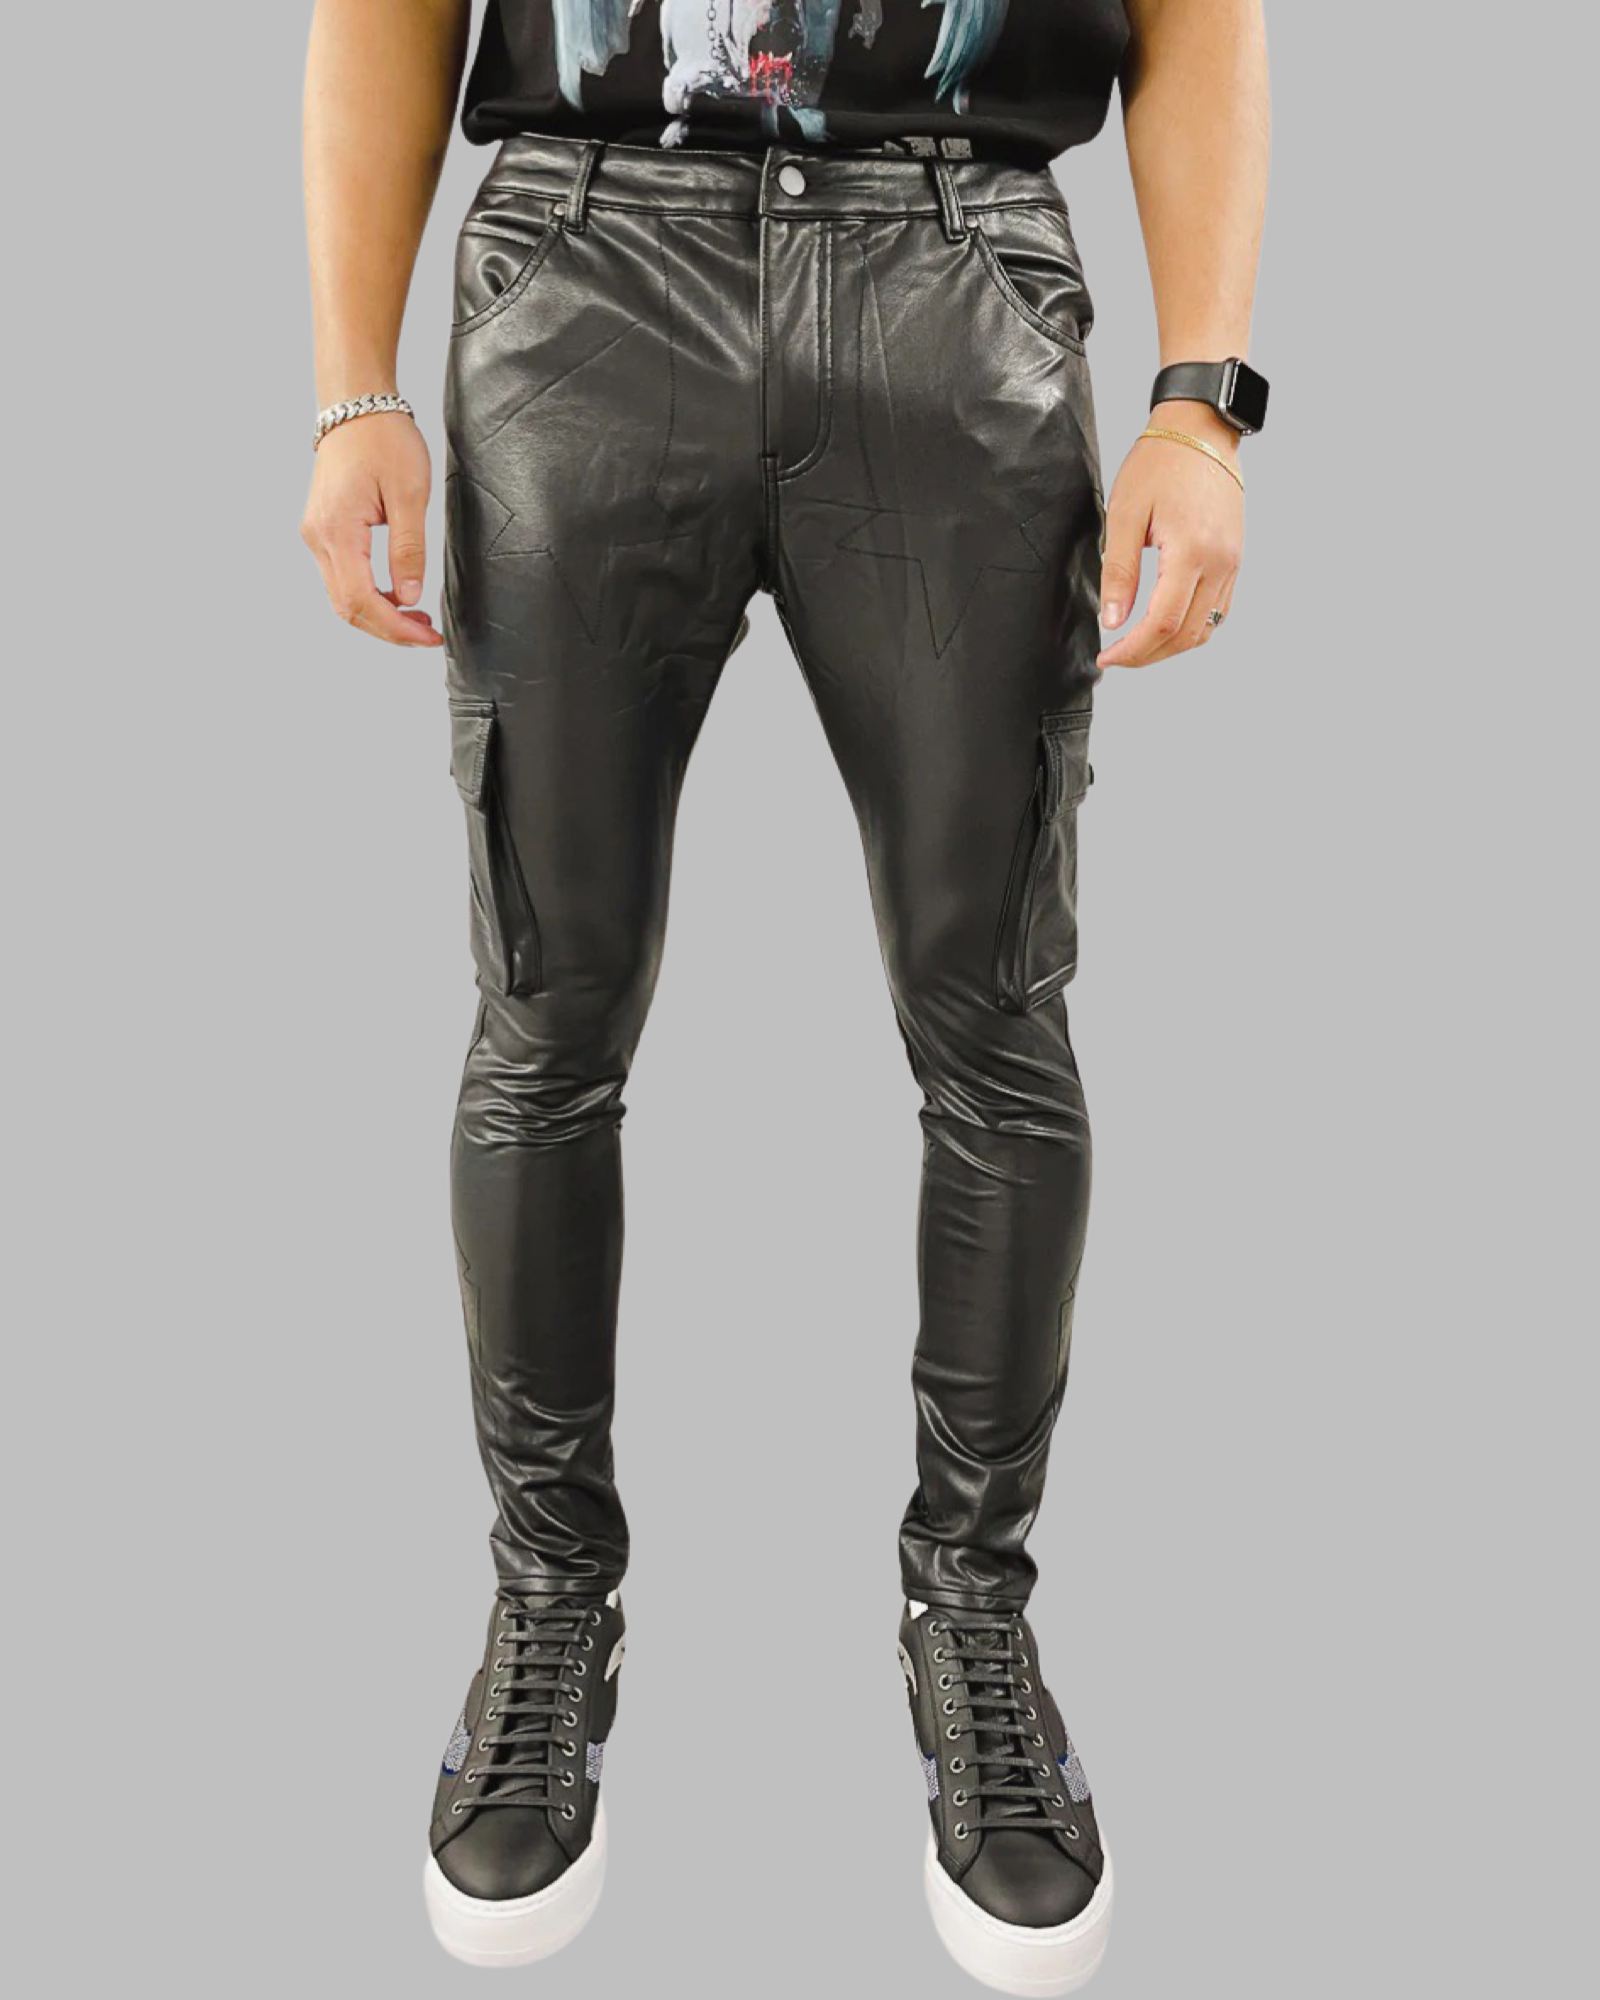 The Cargo Leather Pants